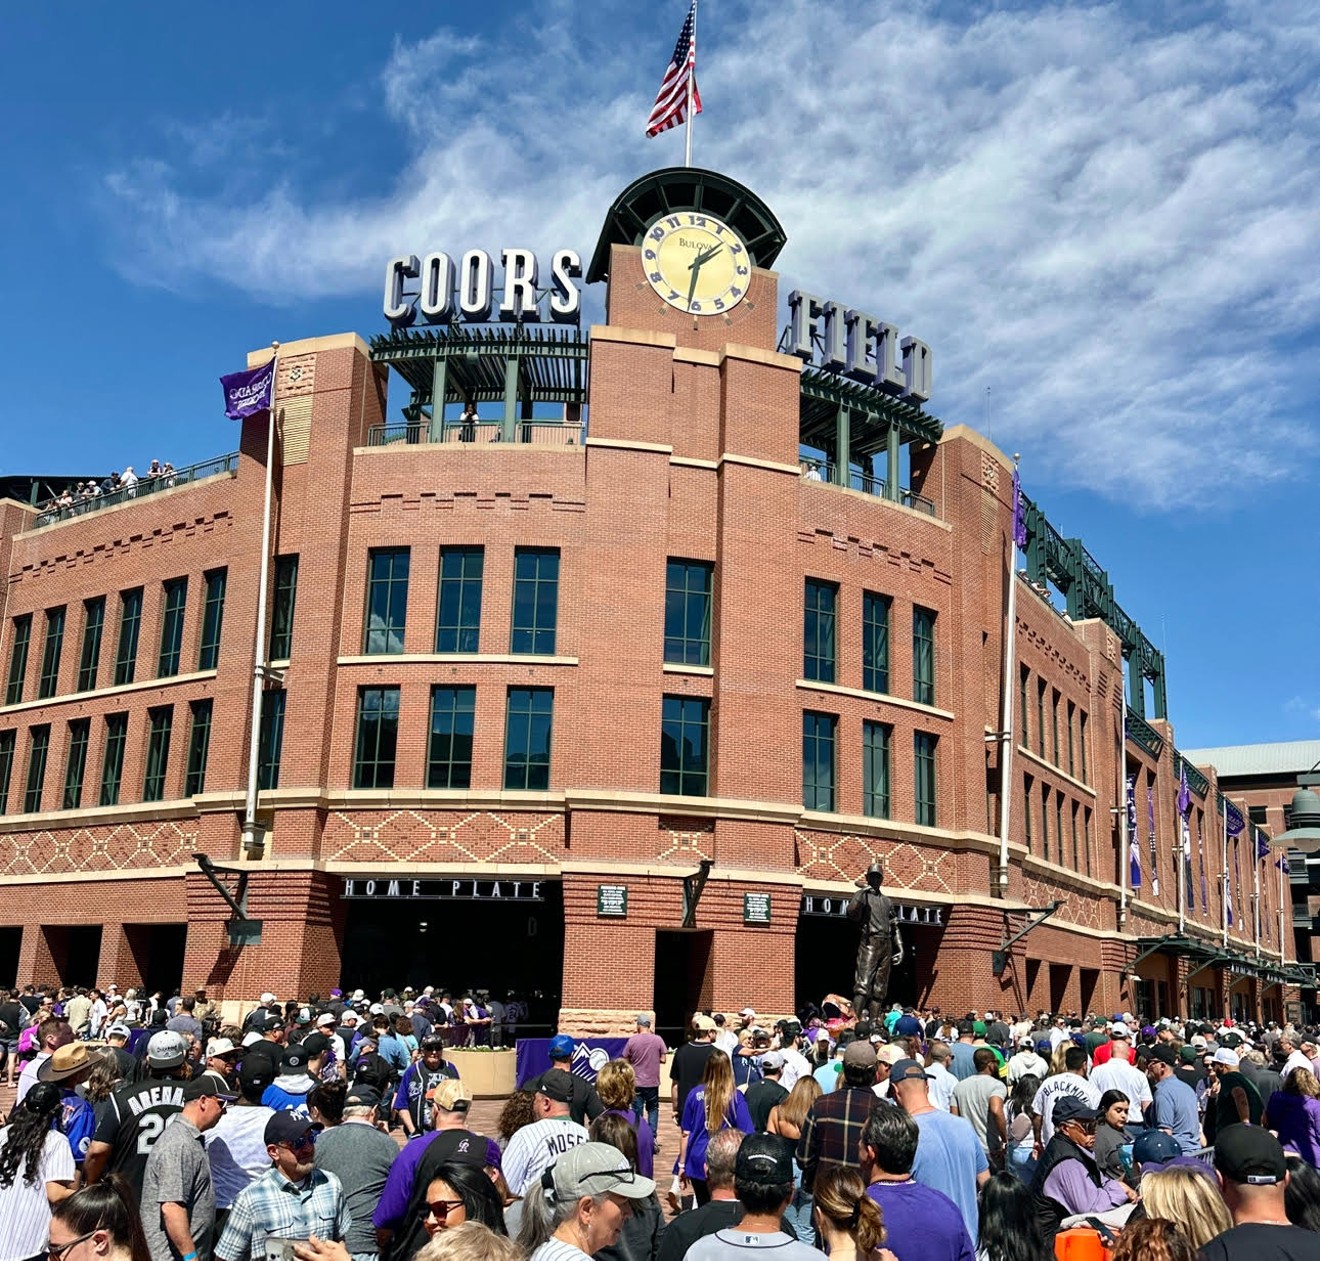 The Colorado Rockies took on the Tampa Bay Rays for Opening Day at Coors Field this year.